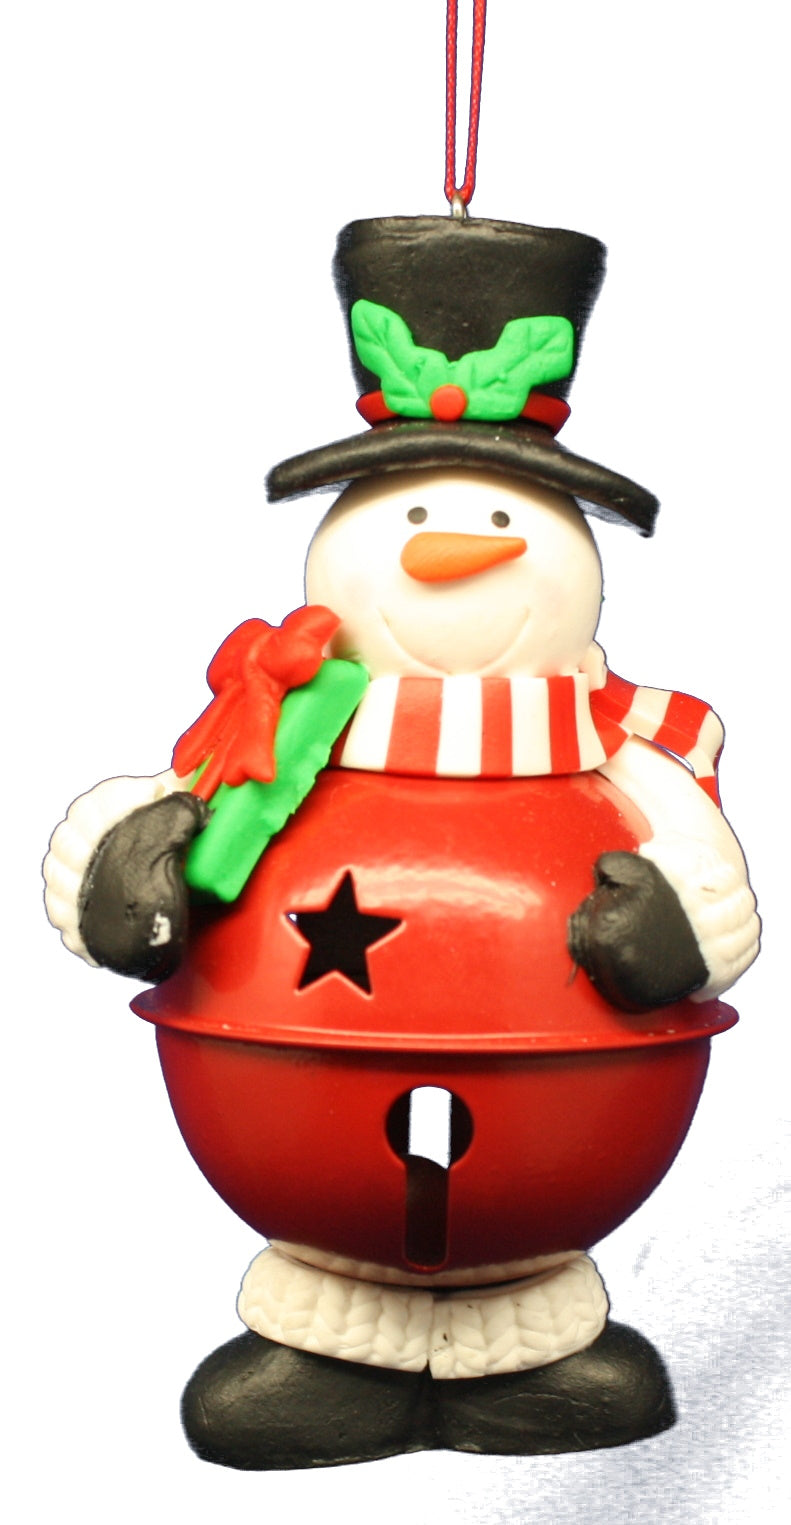 Figurine Bell Ornament - - The Country Christmas Loft